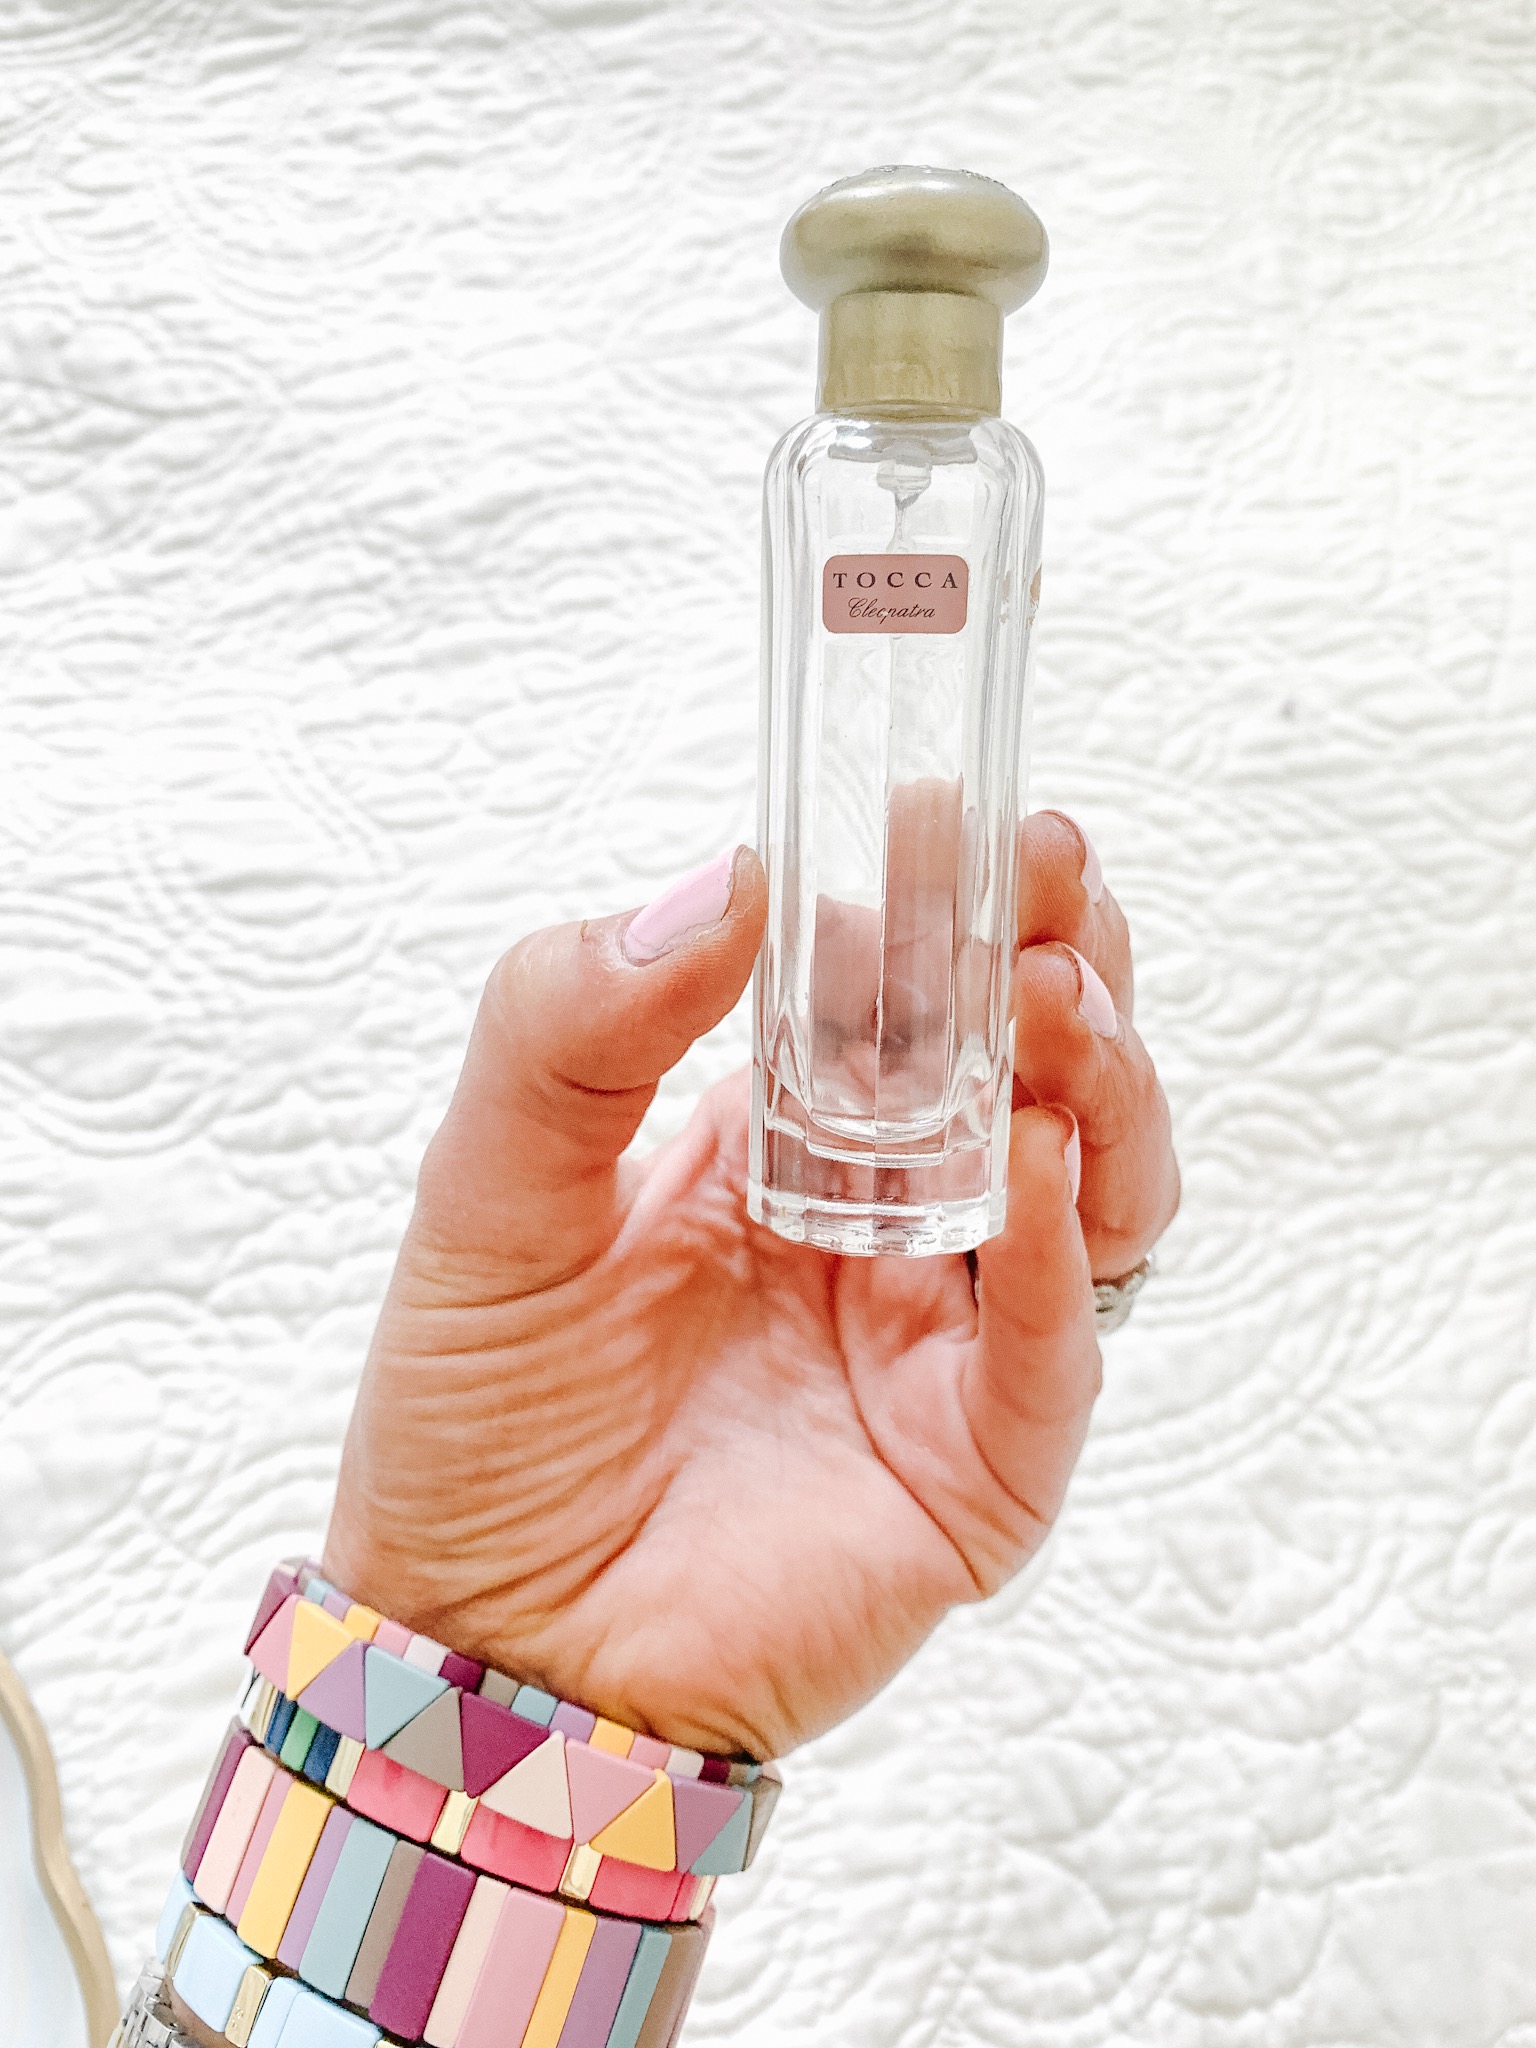 Tocca perfume | Style your Senses